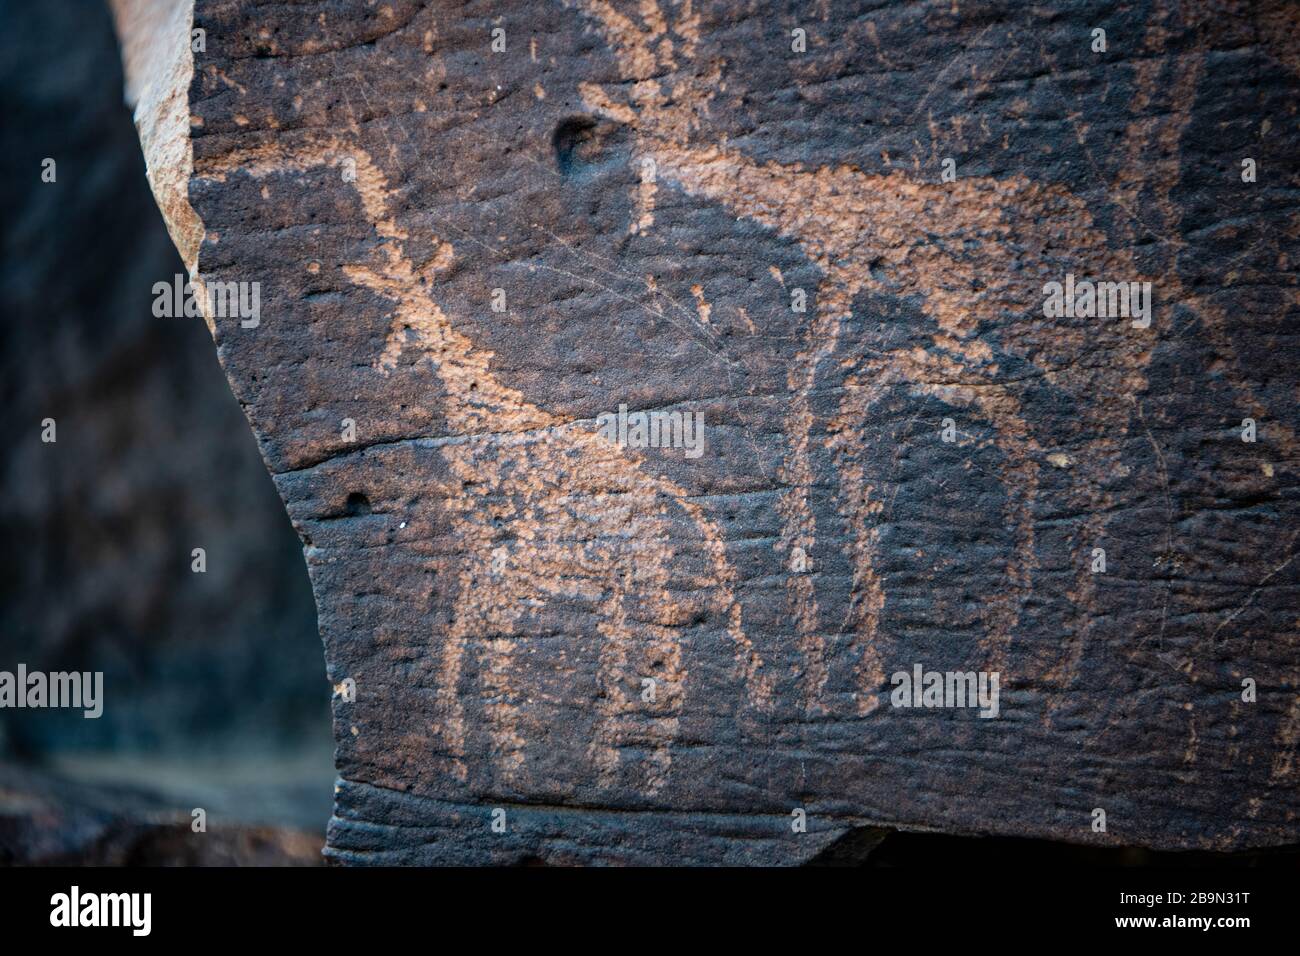 Africa, Djibouti, Abourma. Cave paintings in Abourma Stock Photo